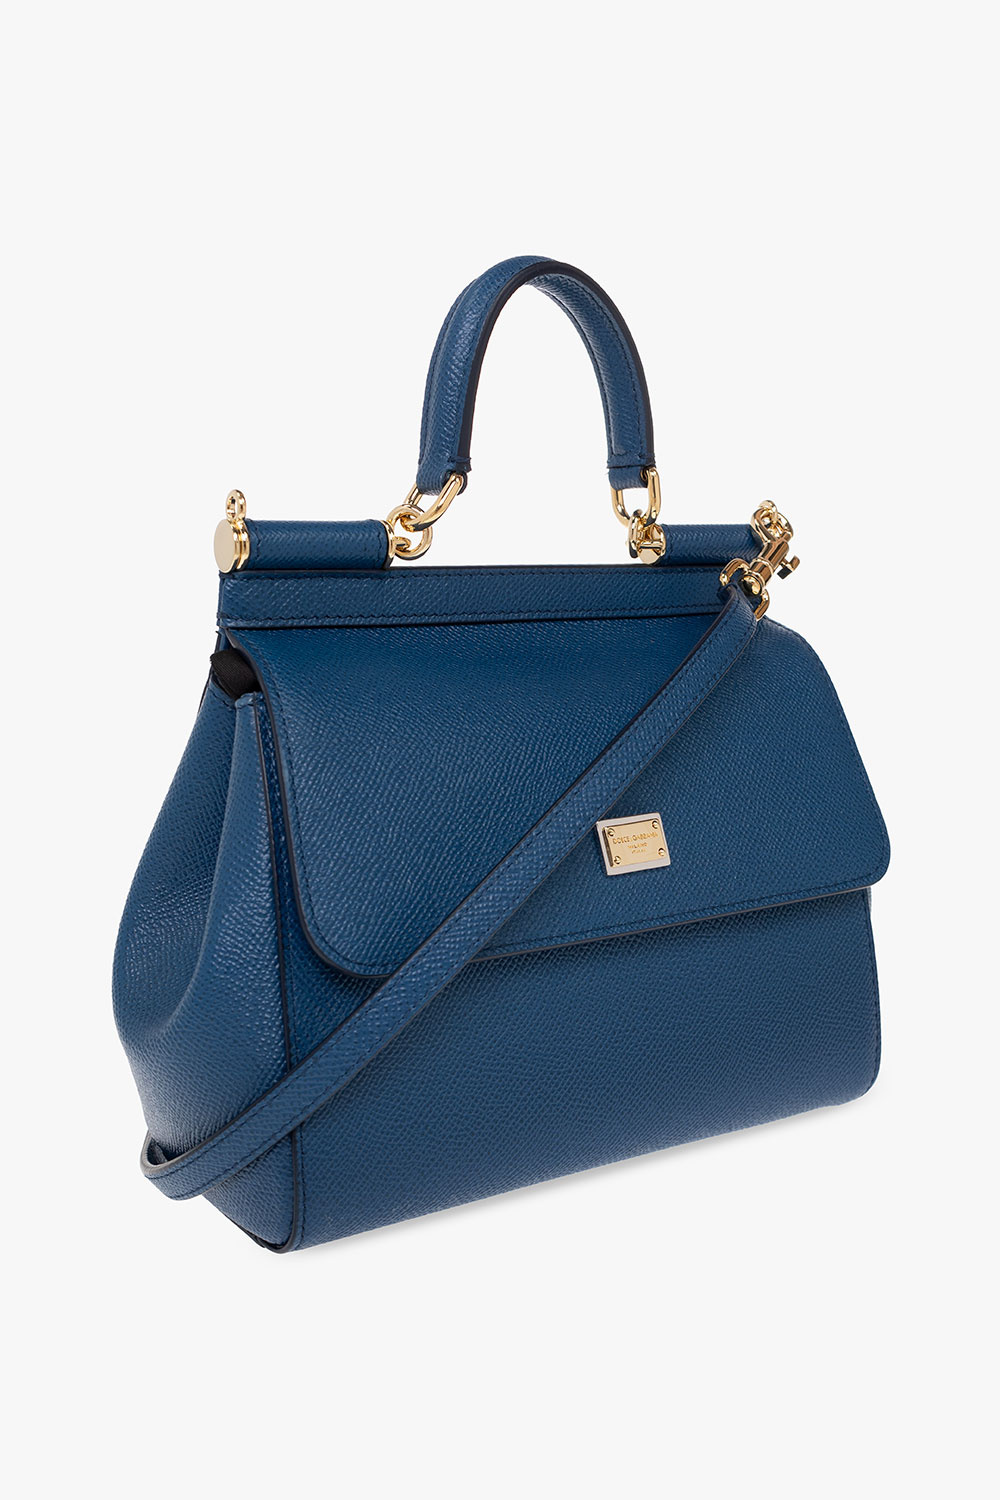 Dolce & Gabbana Sicily Small Leather Bag in Blue